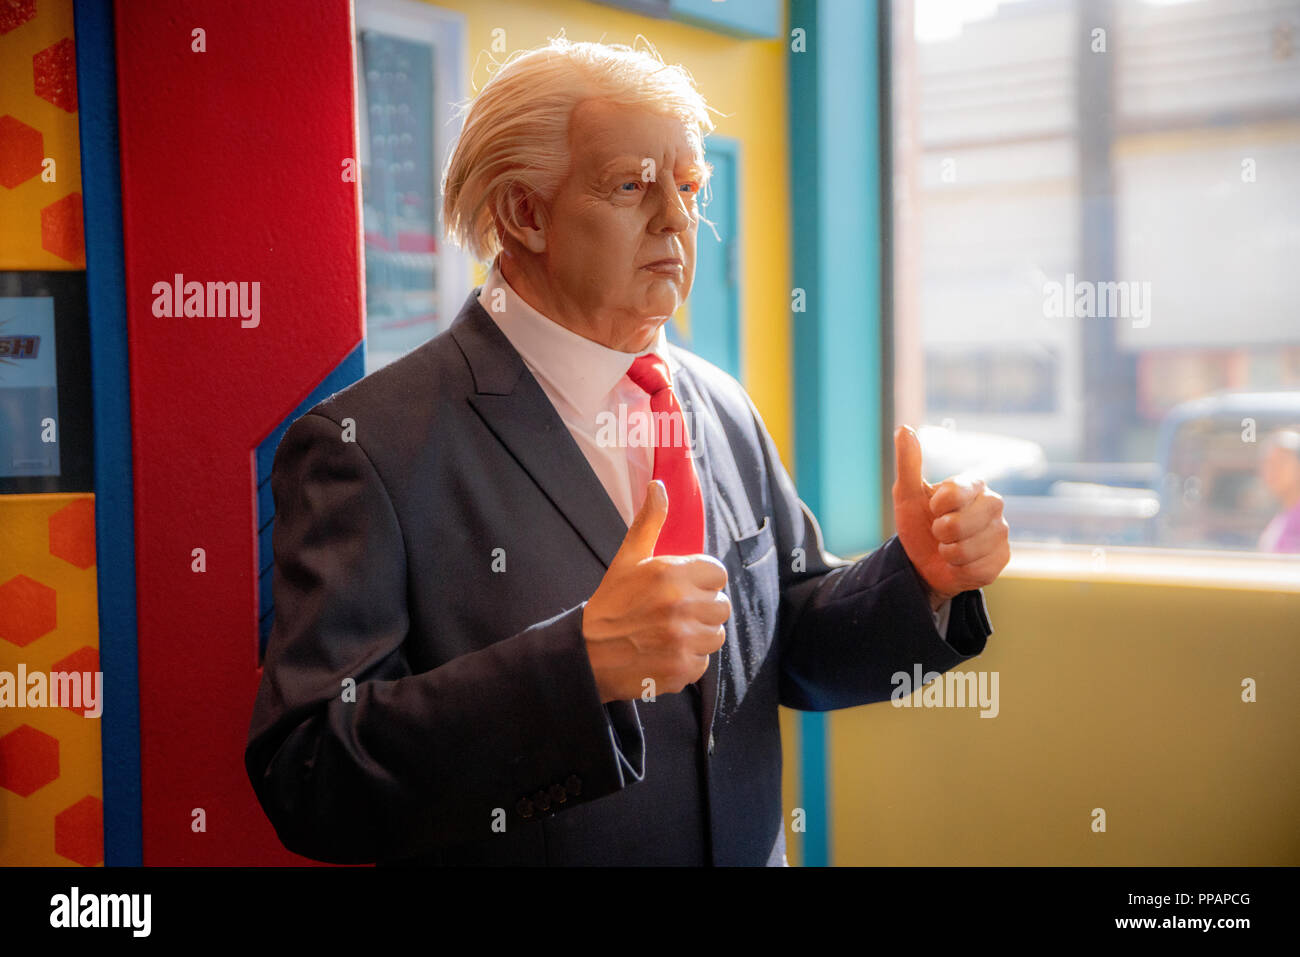 Wax figure of Donald Trump at Ripley's Believe It or Not! museum in Los Angeles, California. Stock Photo